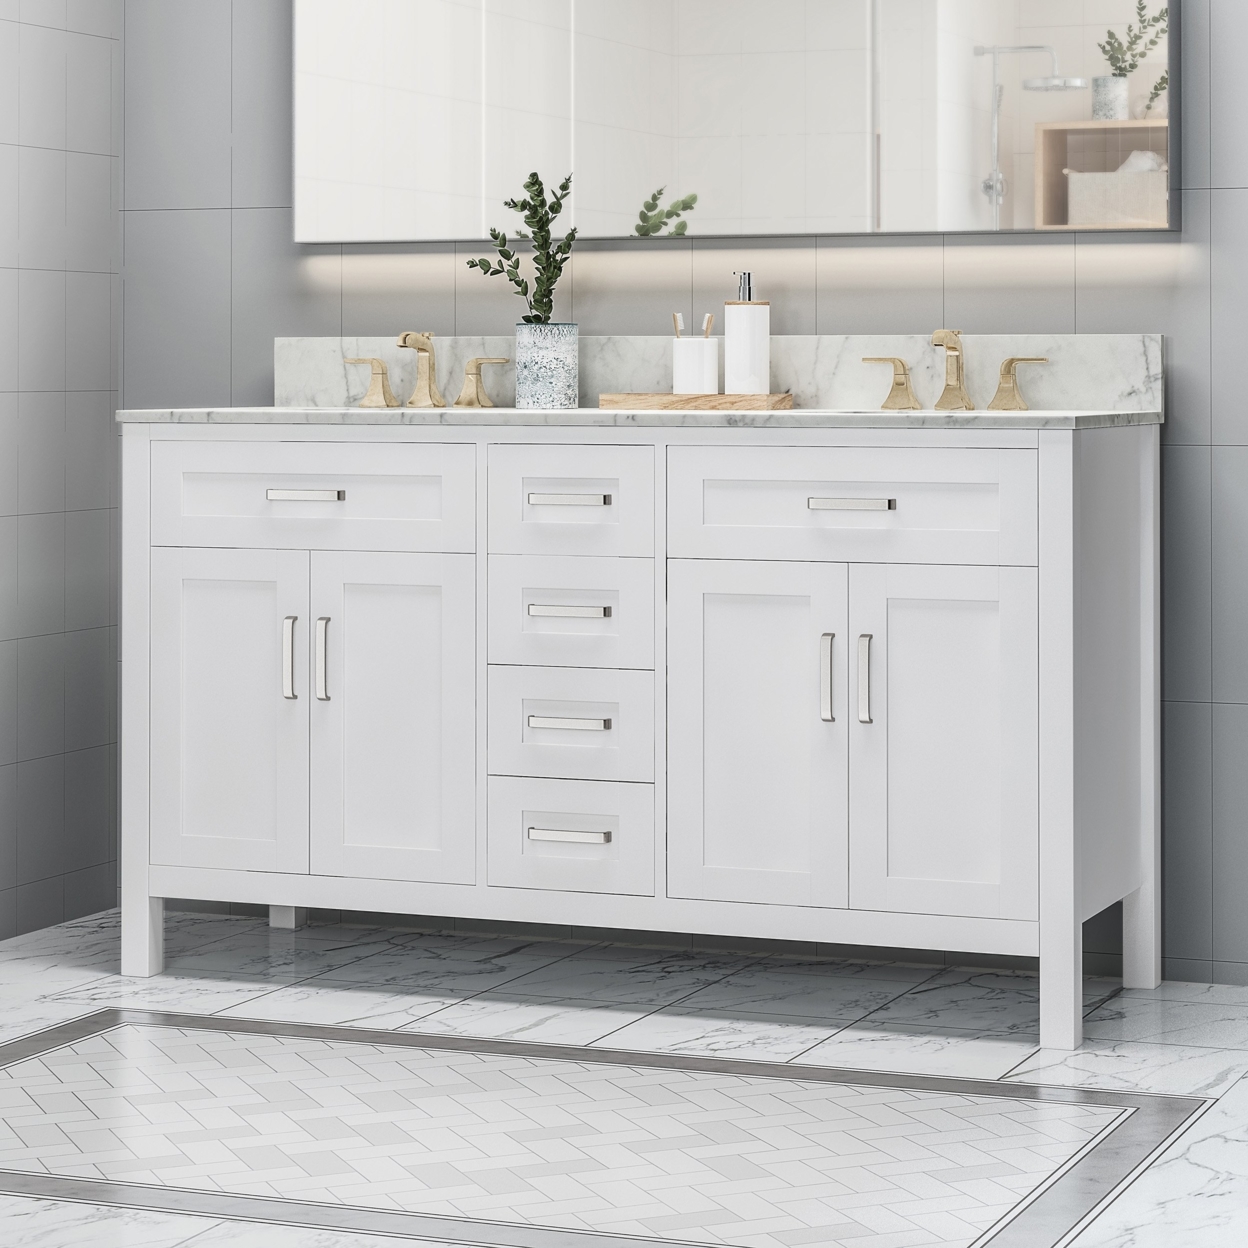 Greeley Contemporary 60 Wood Double Sink Bathroom Vanity With Marble Counter Top With Carrara White Marble - White